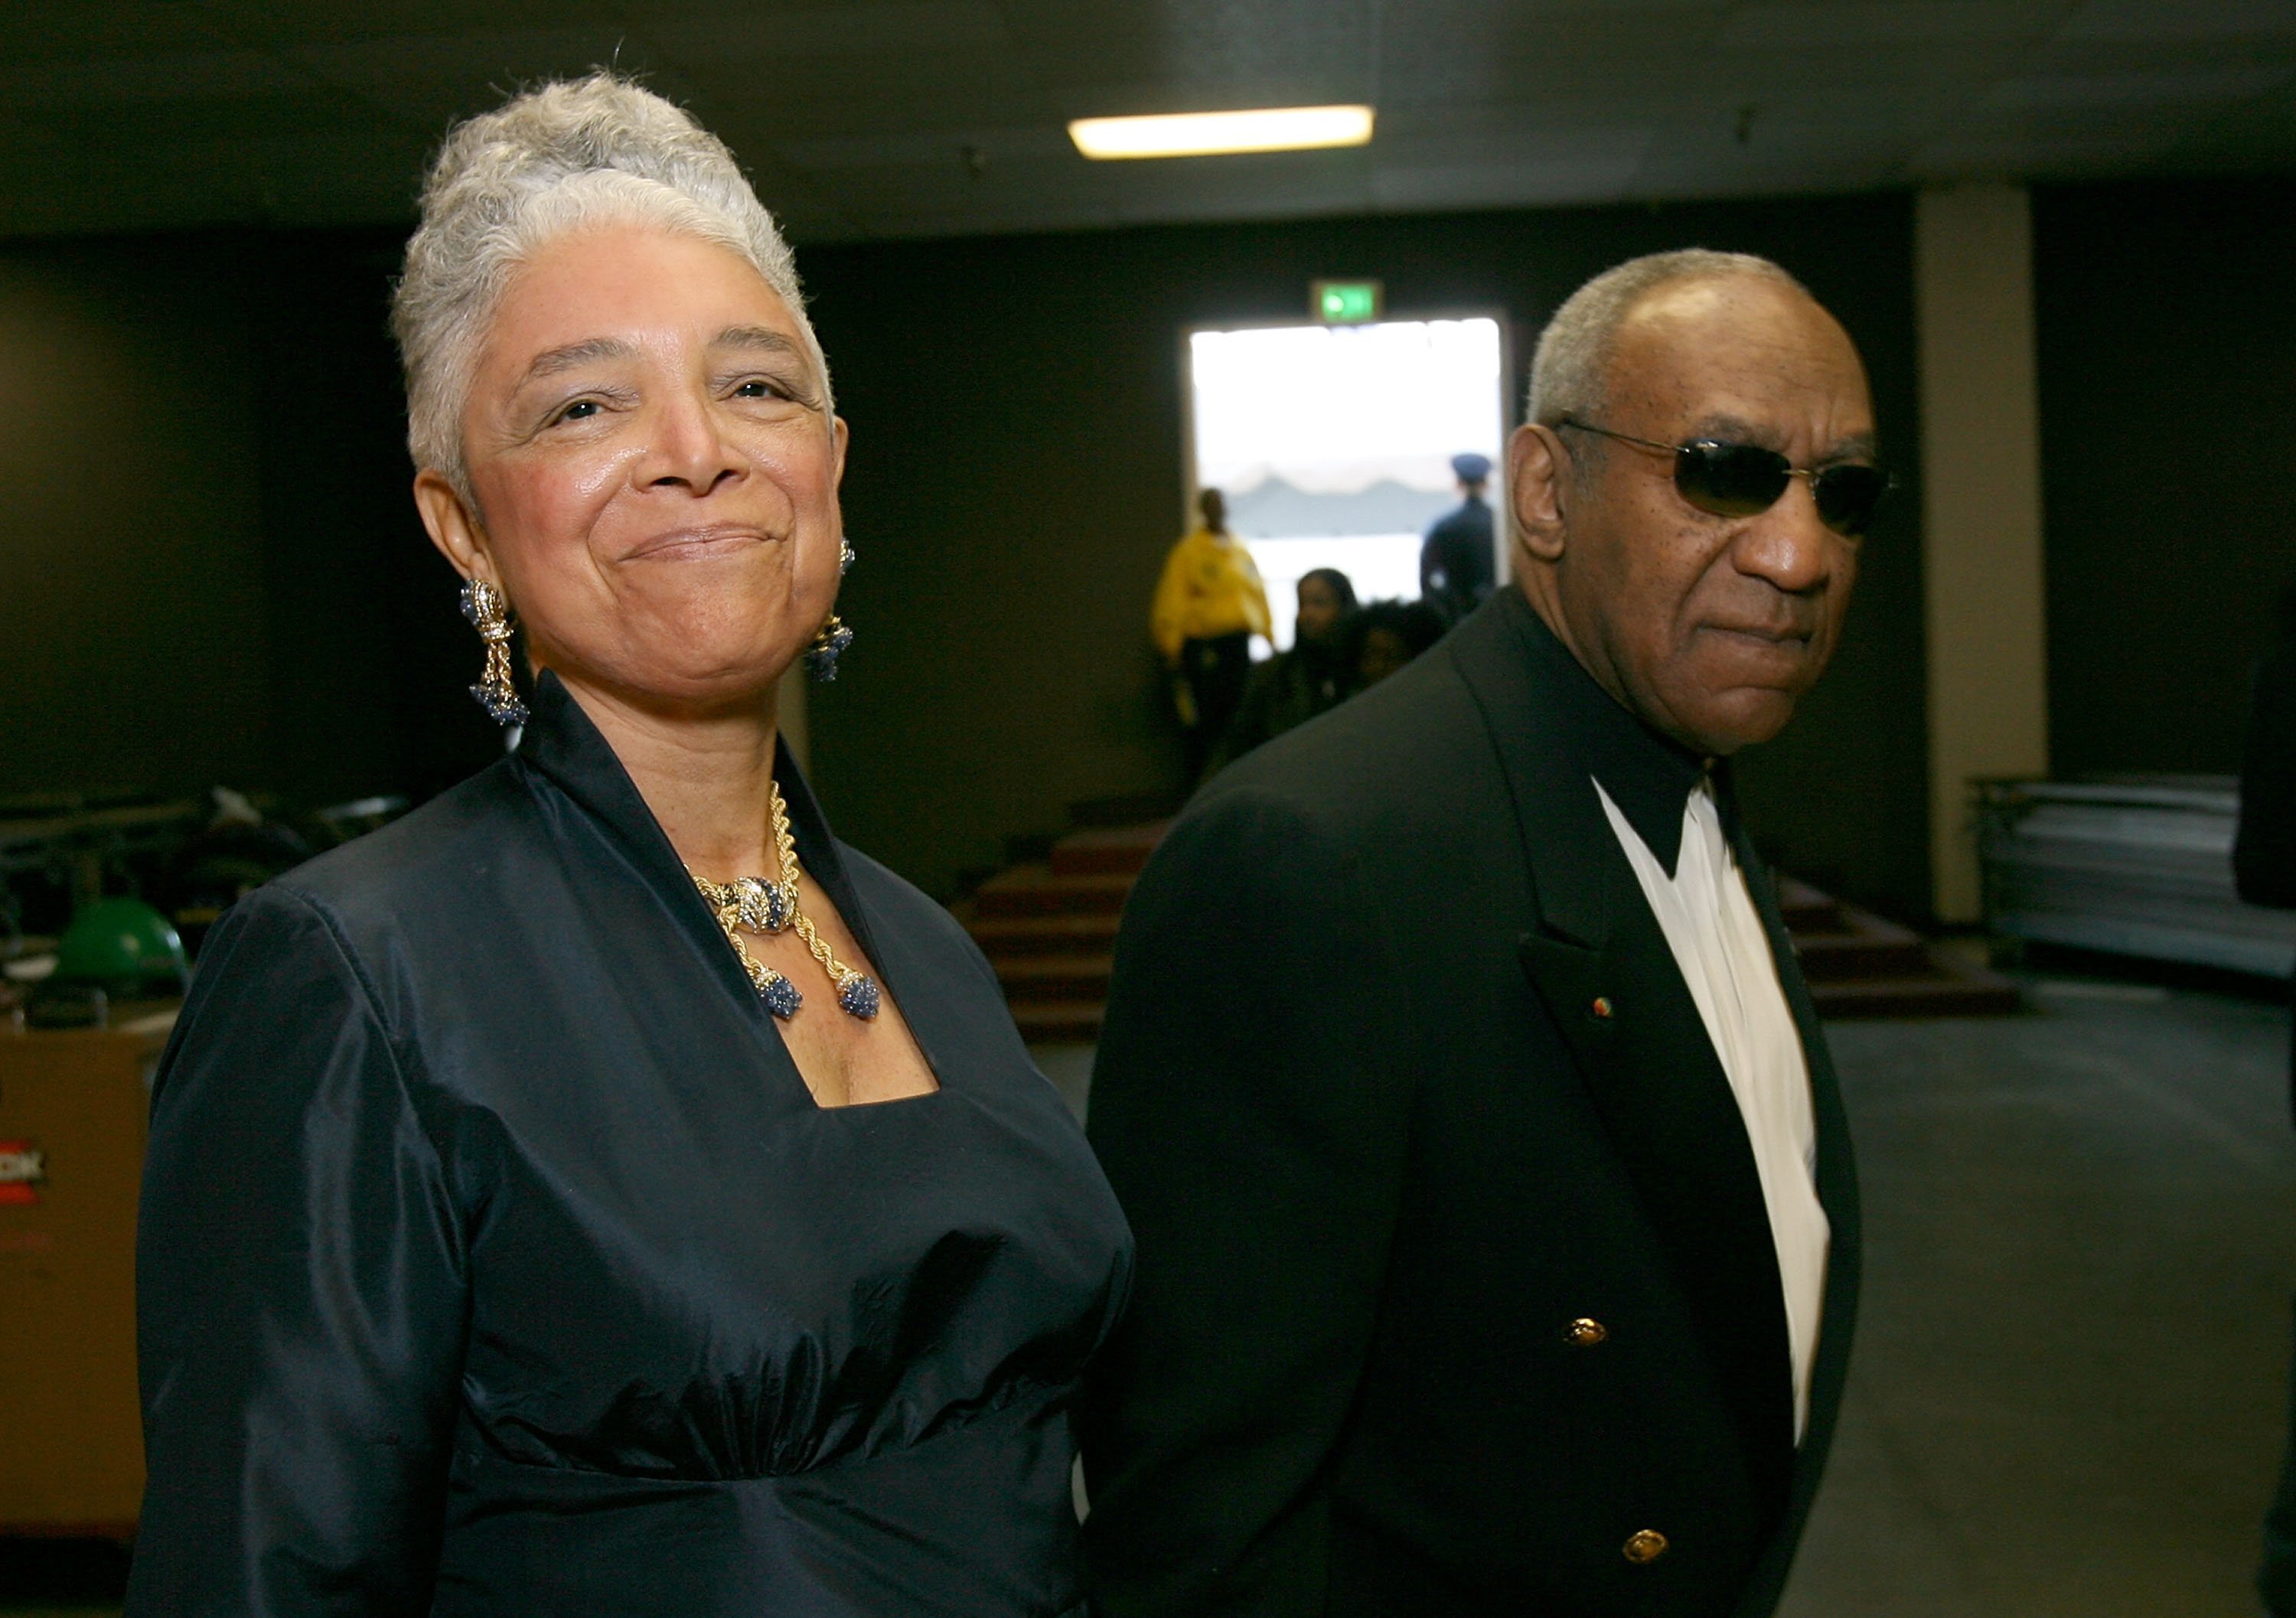 Bill Cosby and wife Camille Cosby during the annual NAACP Image Awards on March 2, 2007 in California | Photo: Getty Images